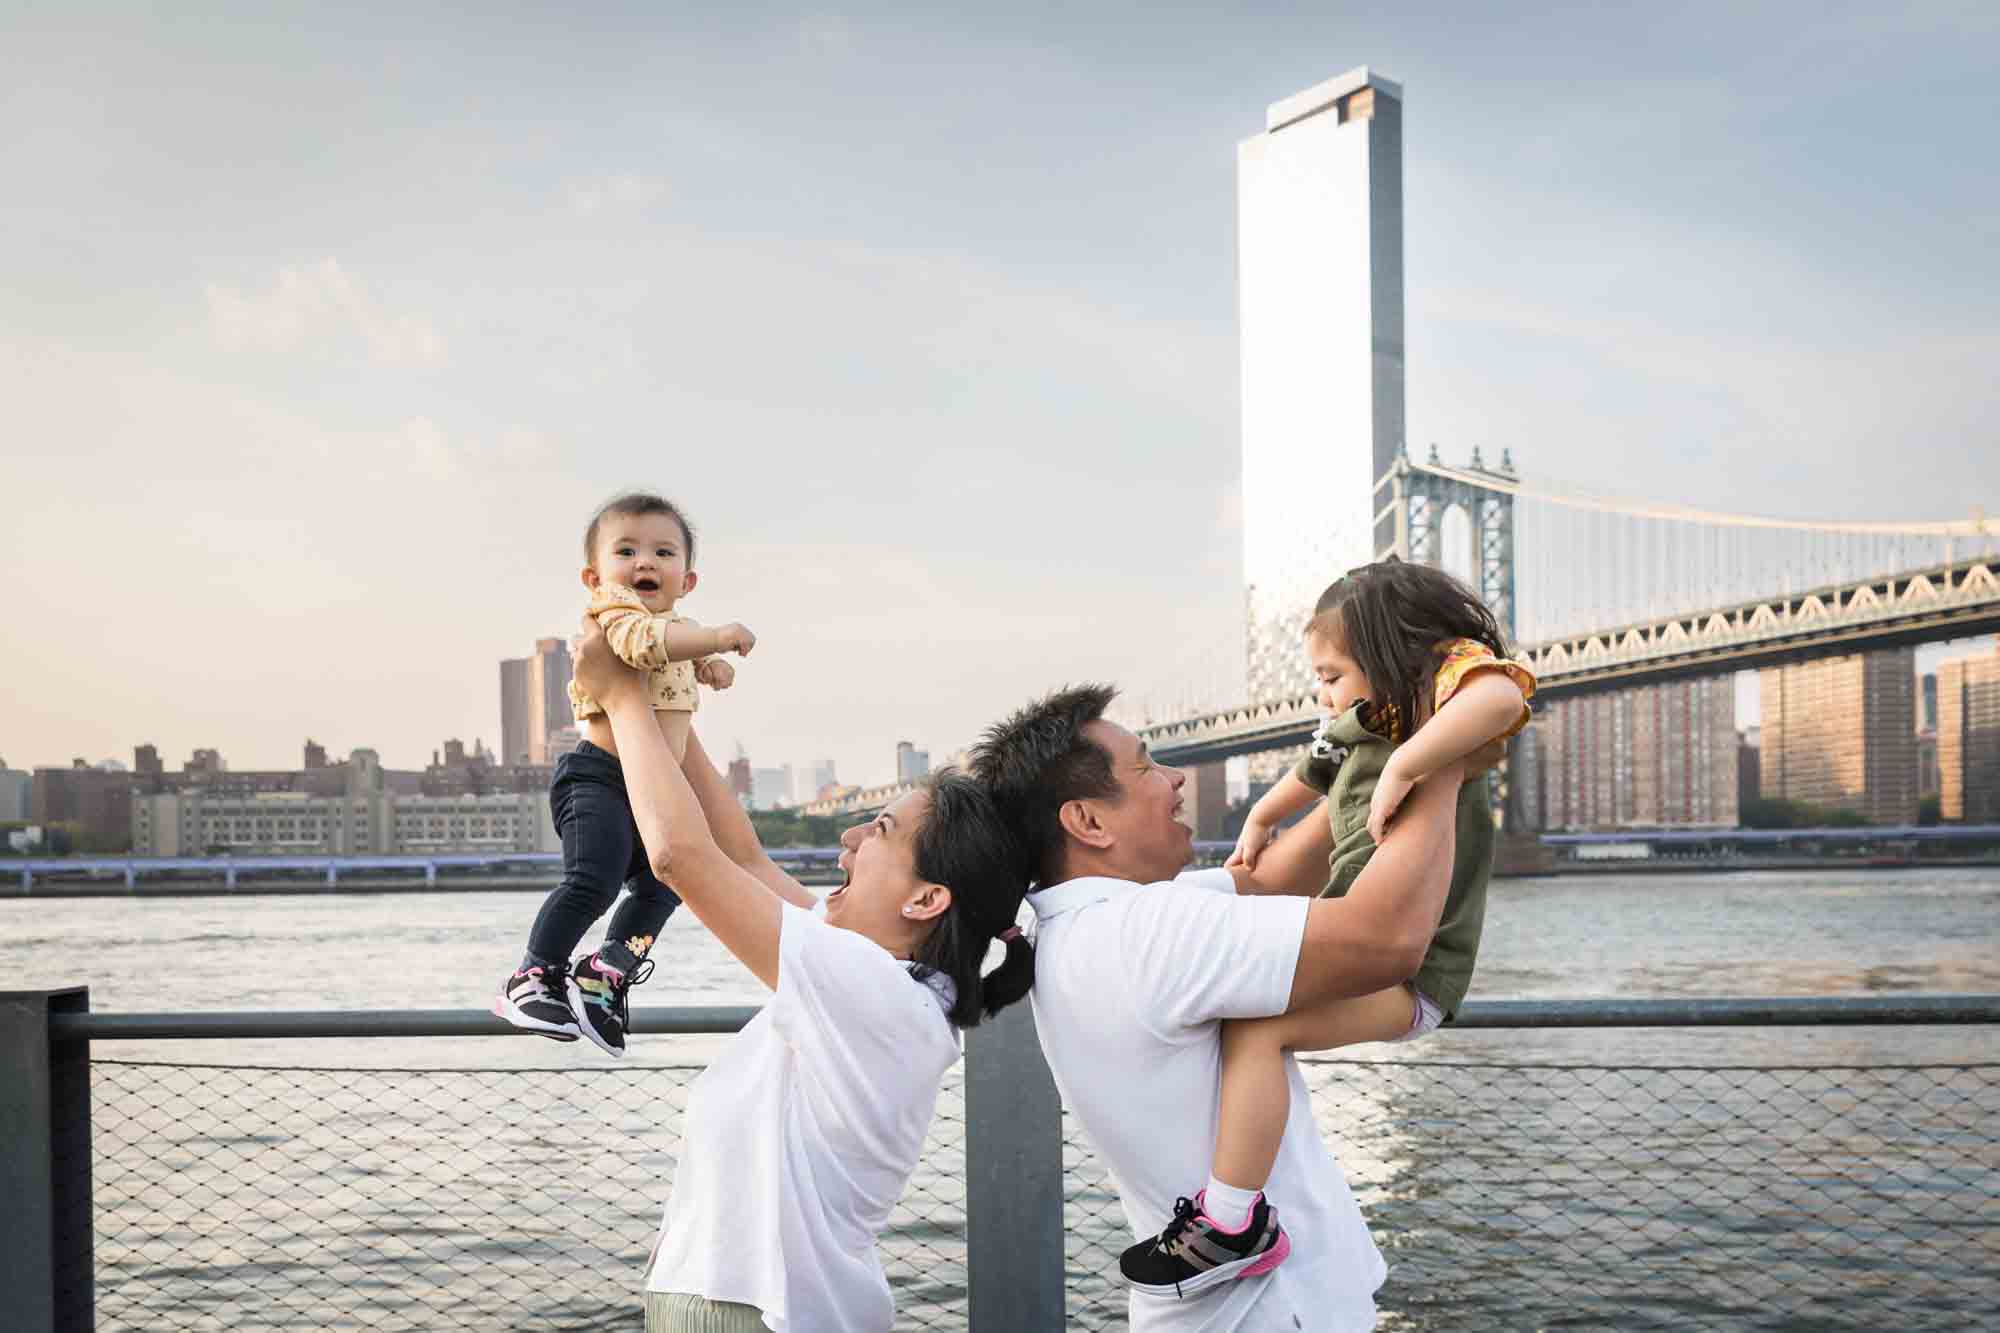 Parents holding two young children in the air in front of waterfront for an article on Brooklyn Bridge Park family portrait tips for young children